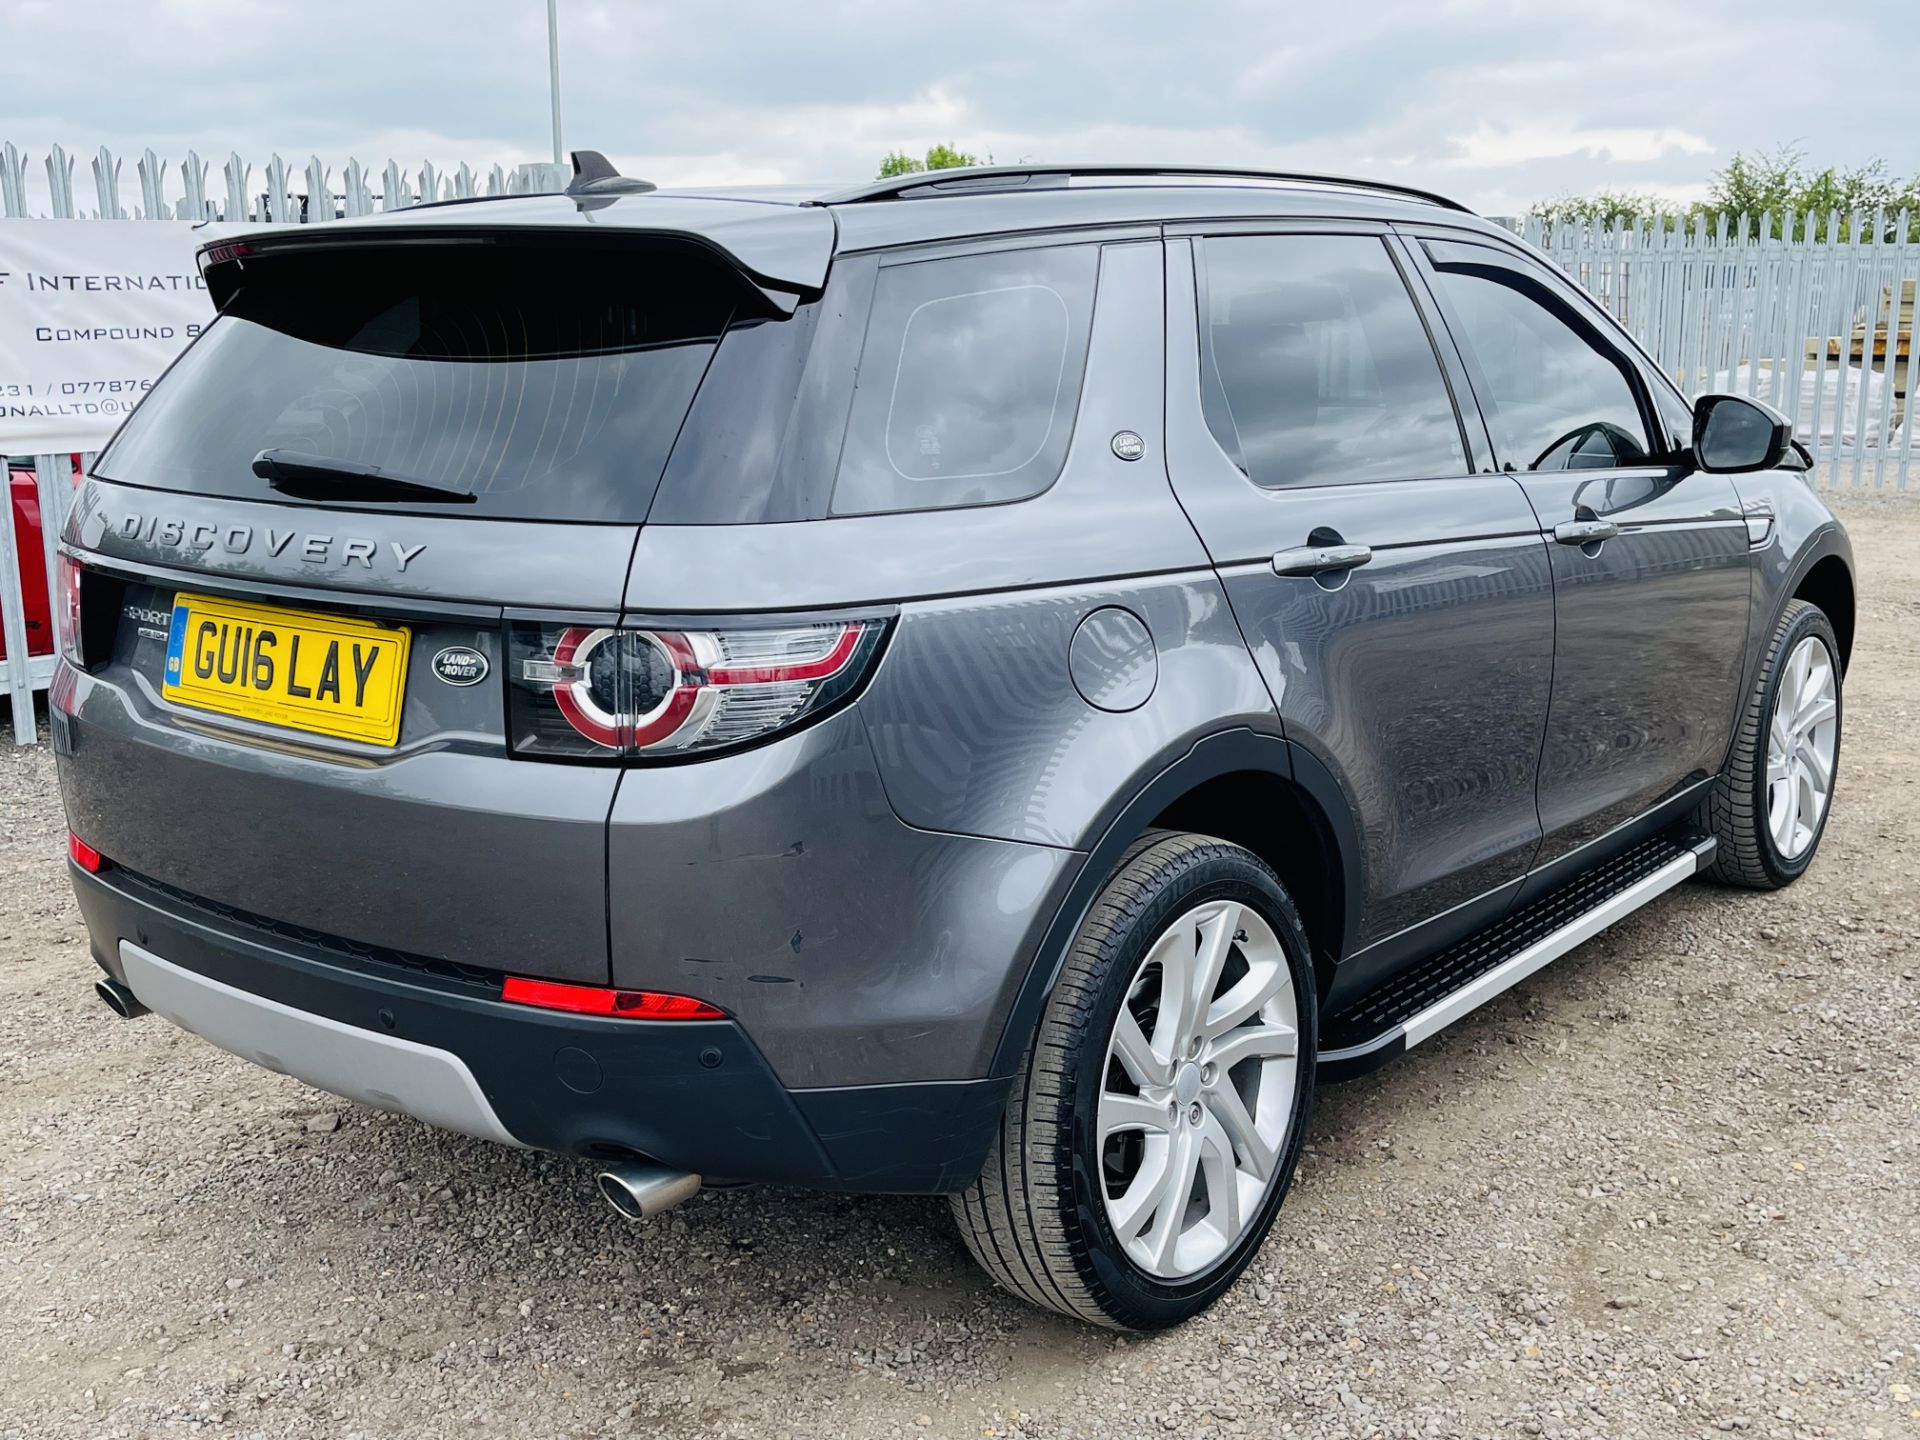 ** ON SALE **Land Rover Discovery sport 2.0 TD4 HSE 2016 '16 Reg' 7 seats - Sat Nav - Euro 6 - - Image 21 of 35